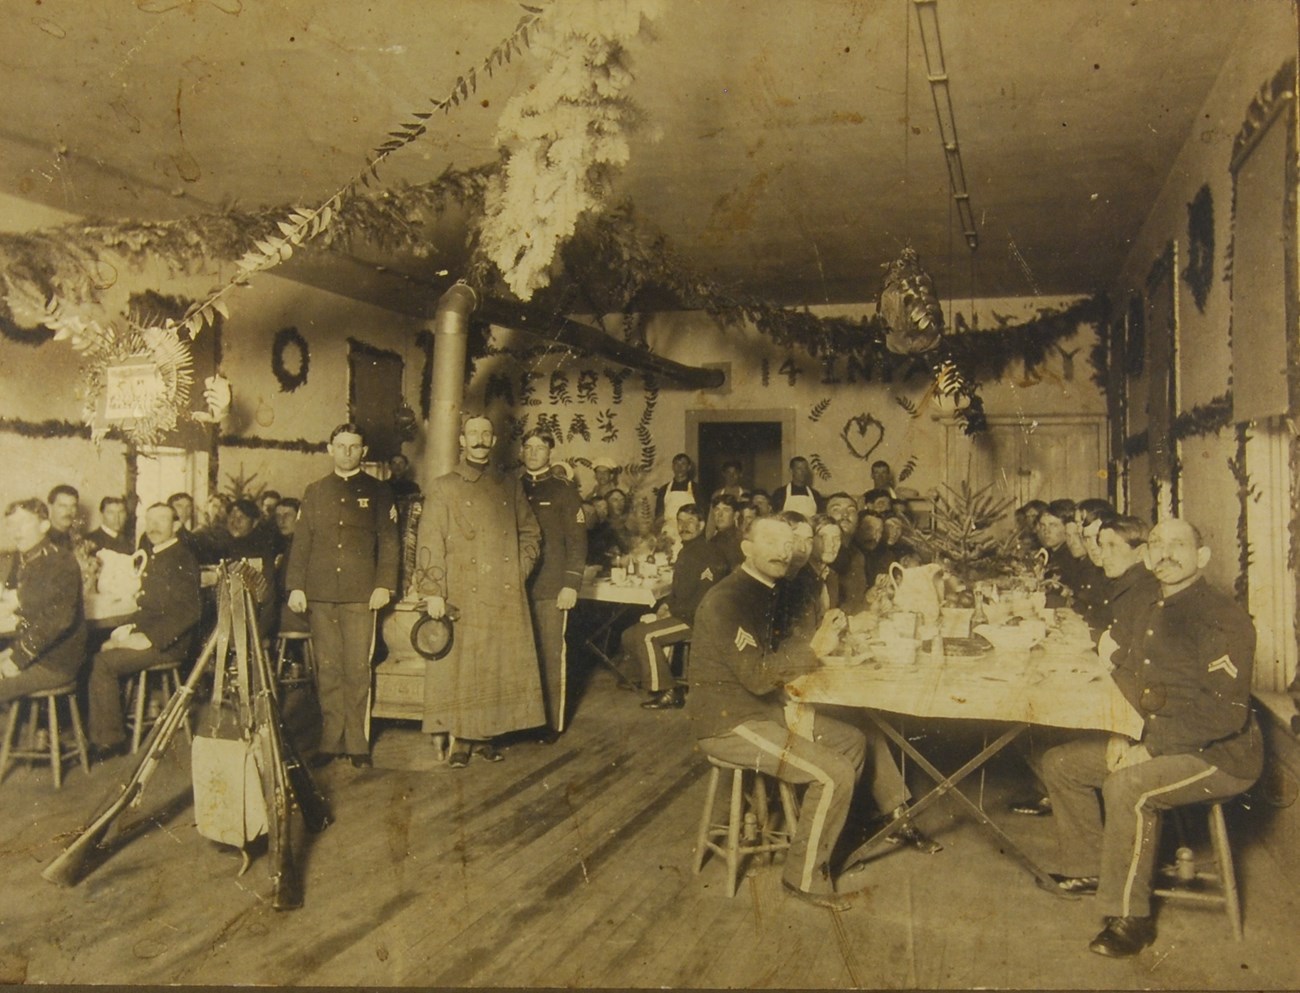 A black and white photo of soldiers sitting inside a room decorated for Christmas.